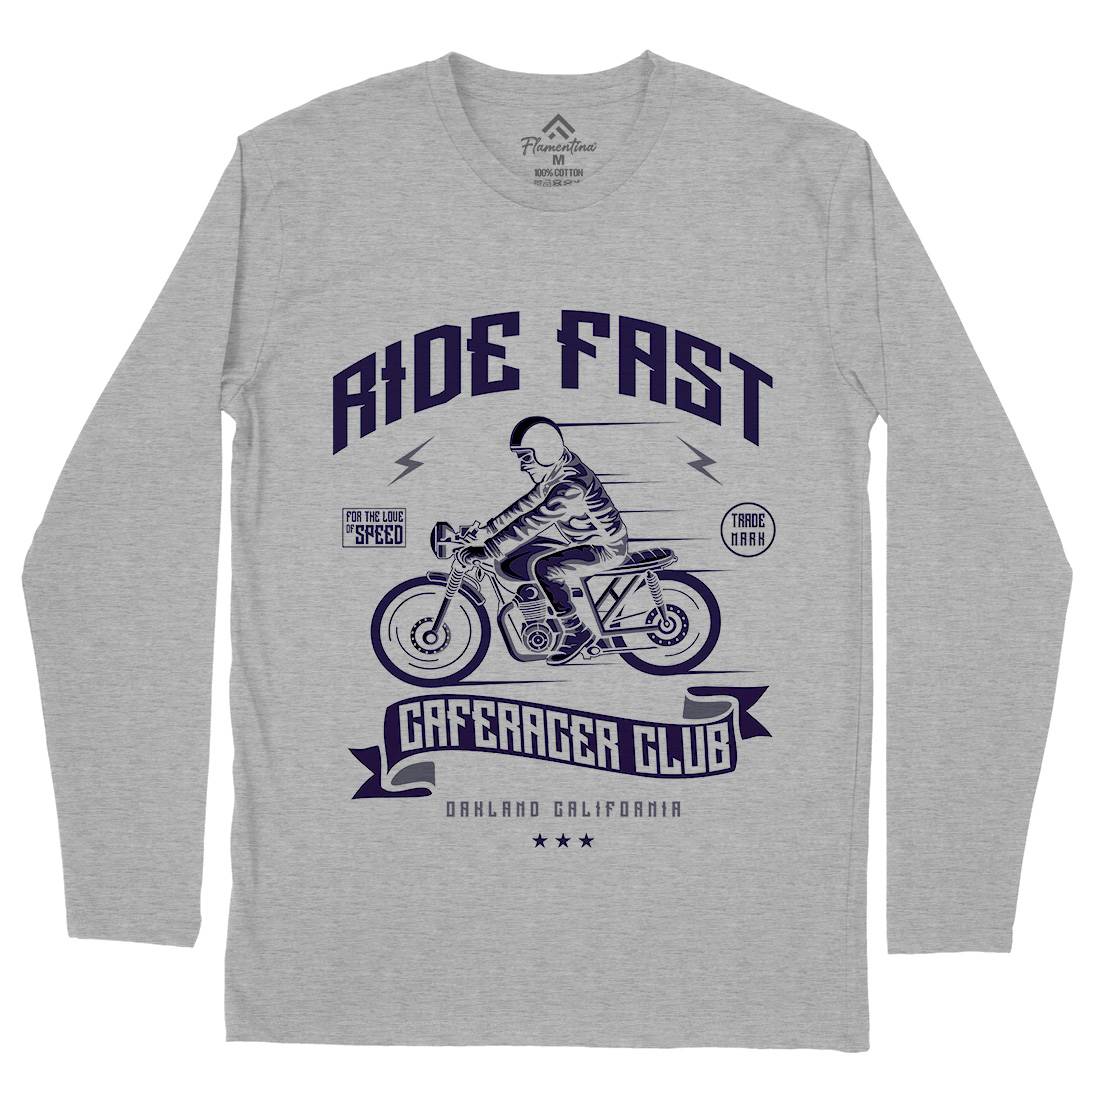 Ride Fast Mens Long Sleeve T-Shirt Motorcycles A117